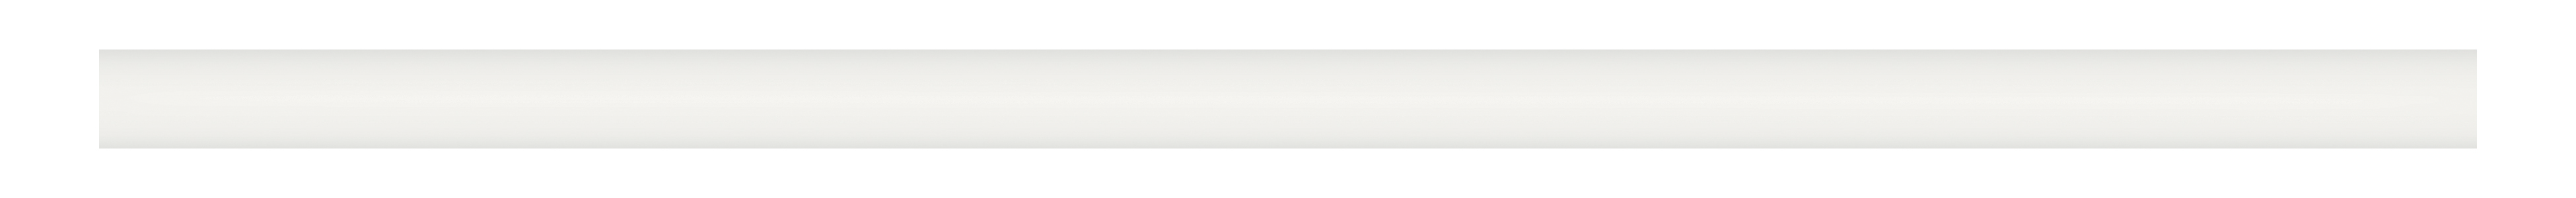 canvas white pattern glazed ceramic quarter round molding from soho anatolia collection distributed by surface group international glossy finish pressed edge 12-inch bar shape